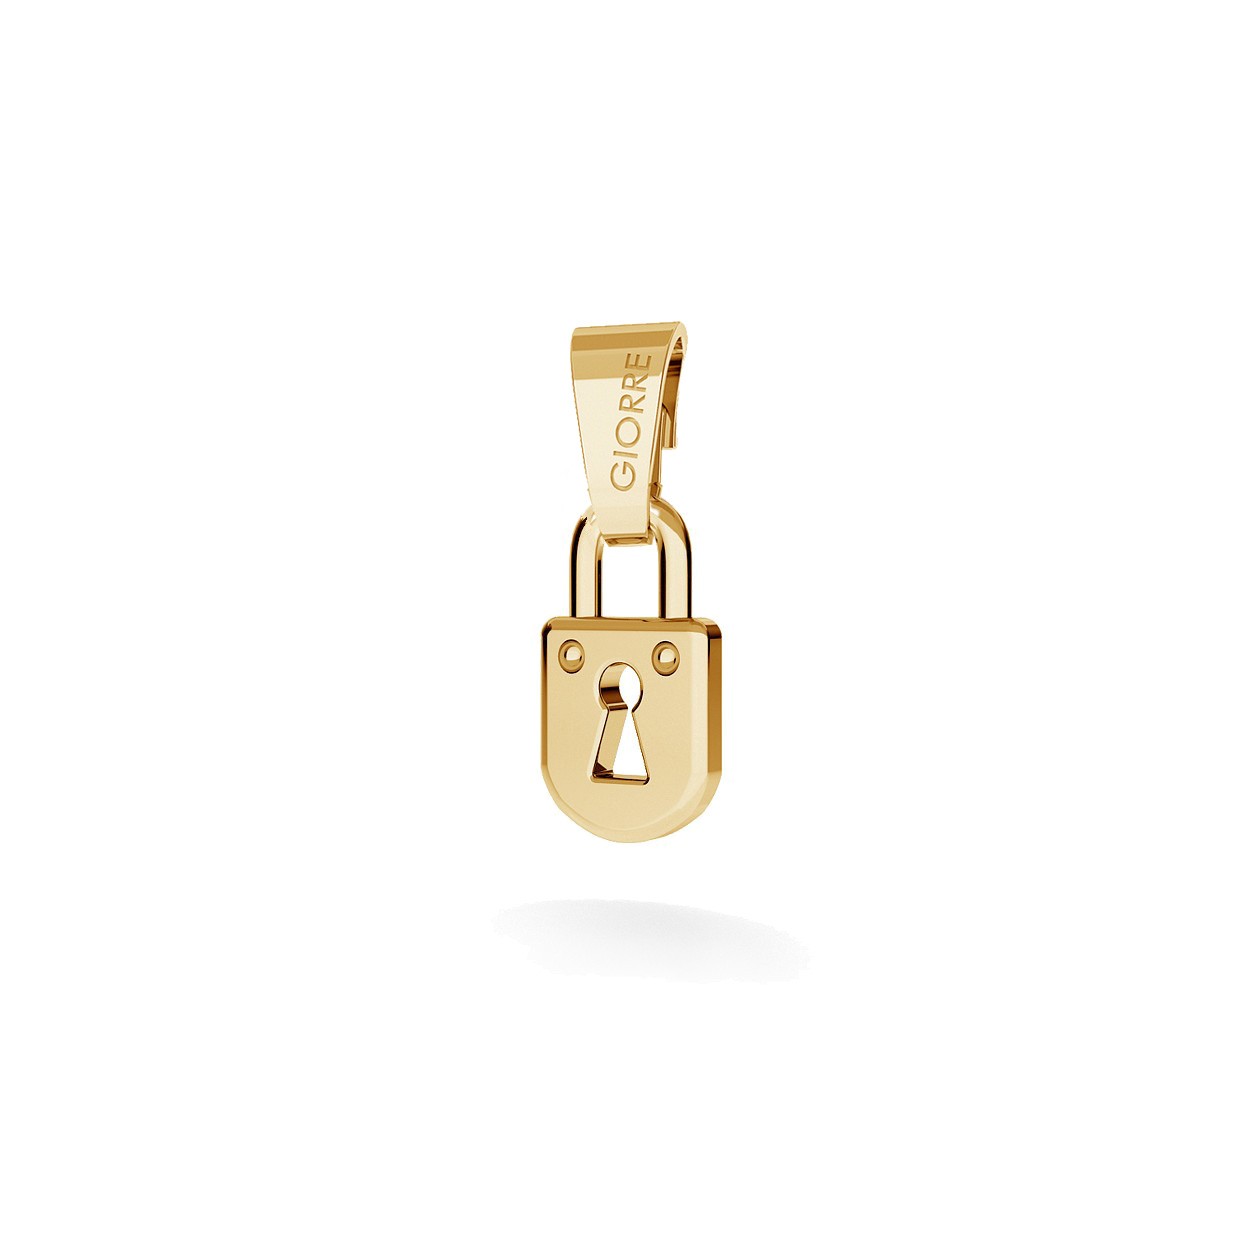 CHARM 89, PADLOCK, SILVER 925,  RHODIUM OR GOLD PLATED